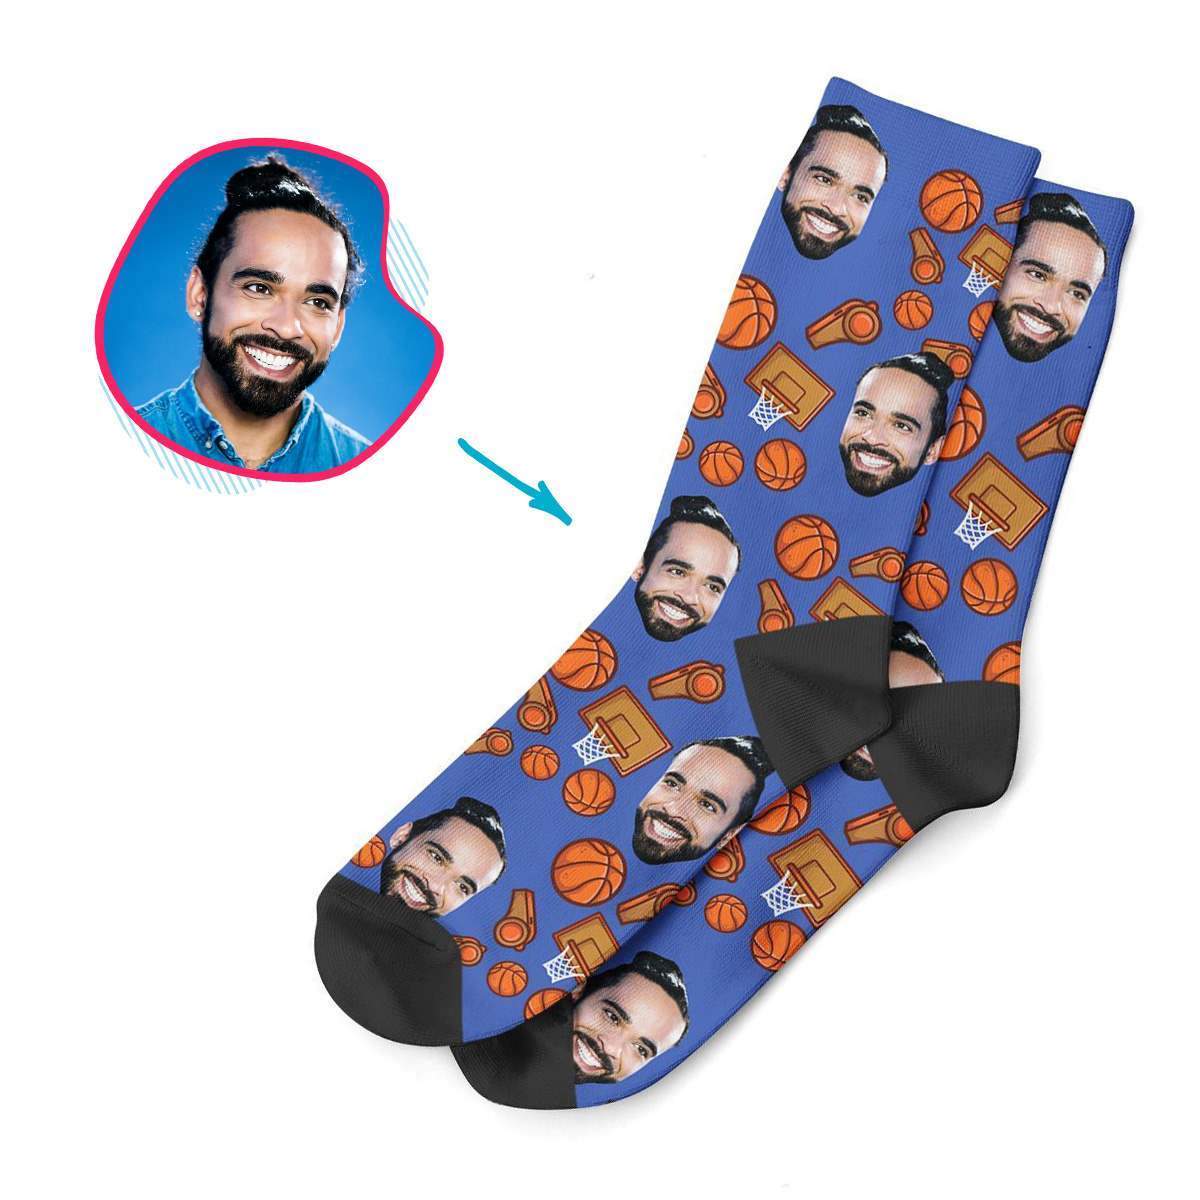 darkblue Basketball socks personalized with photo of face printed on them